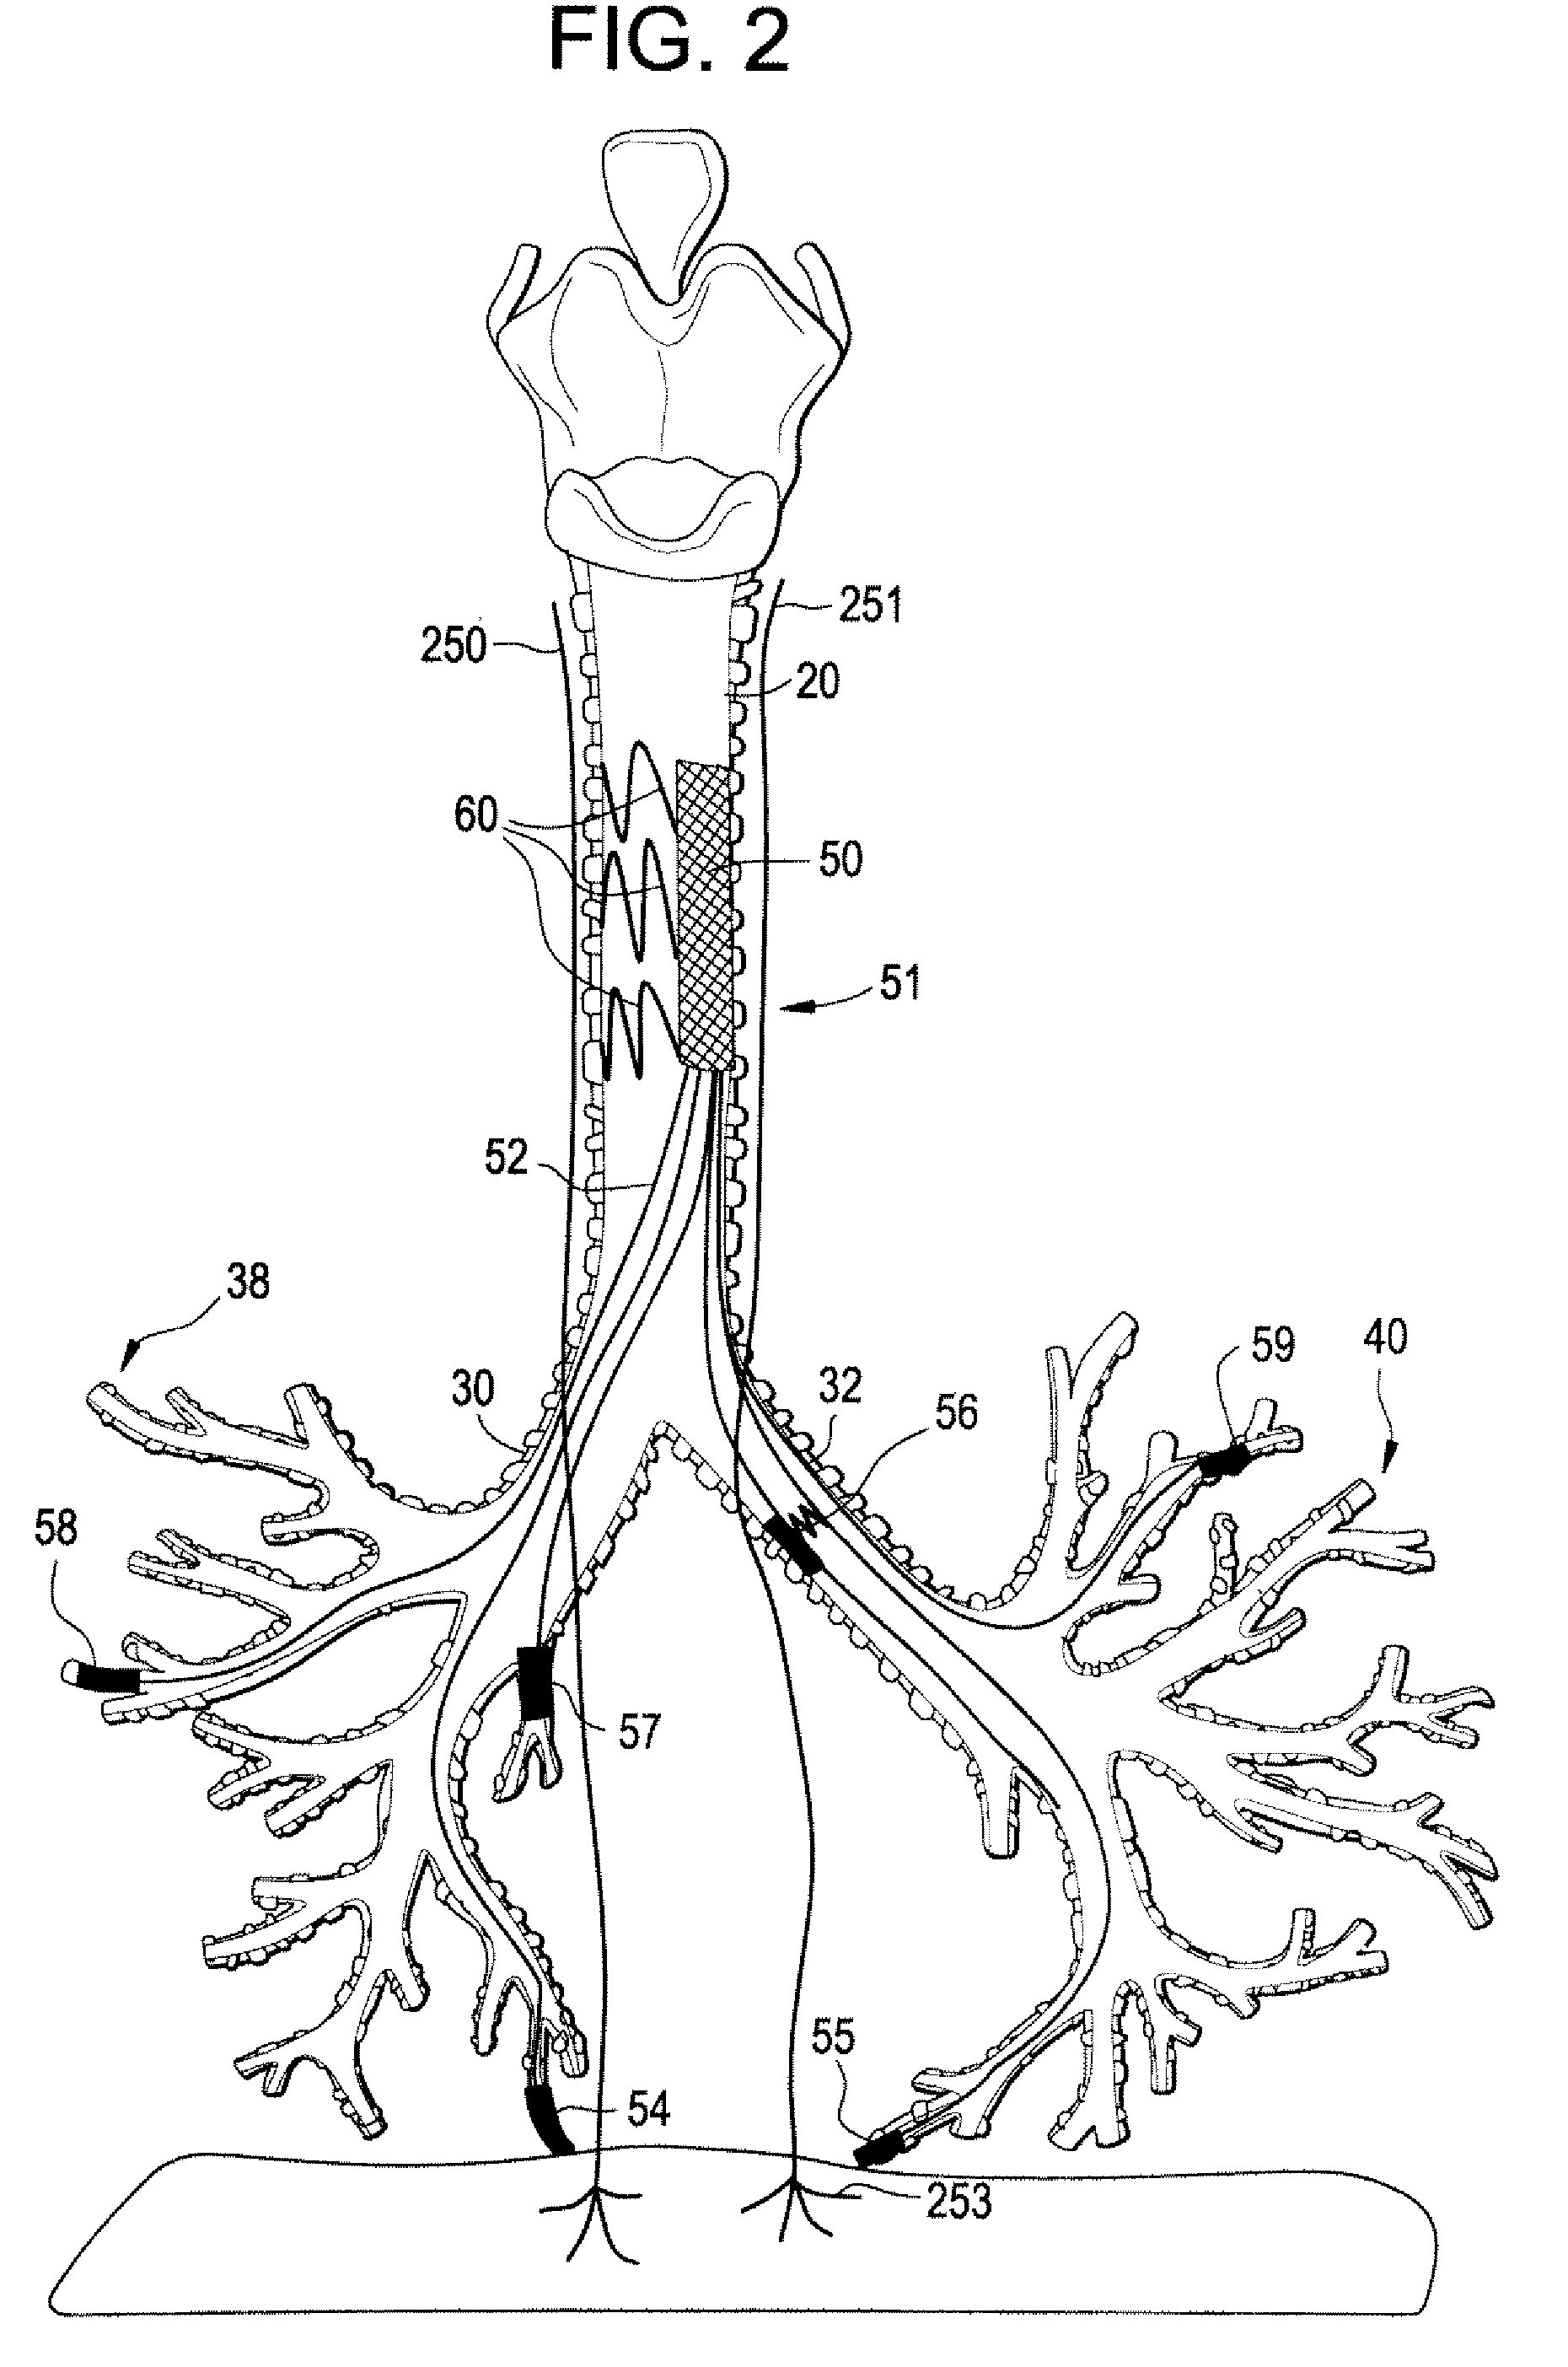 Devices and methods for electrical stimulation of the diaphragm and nerves